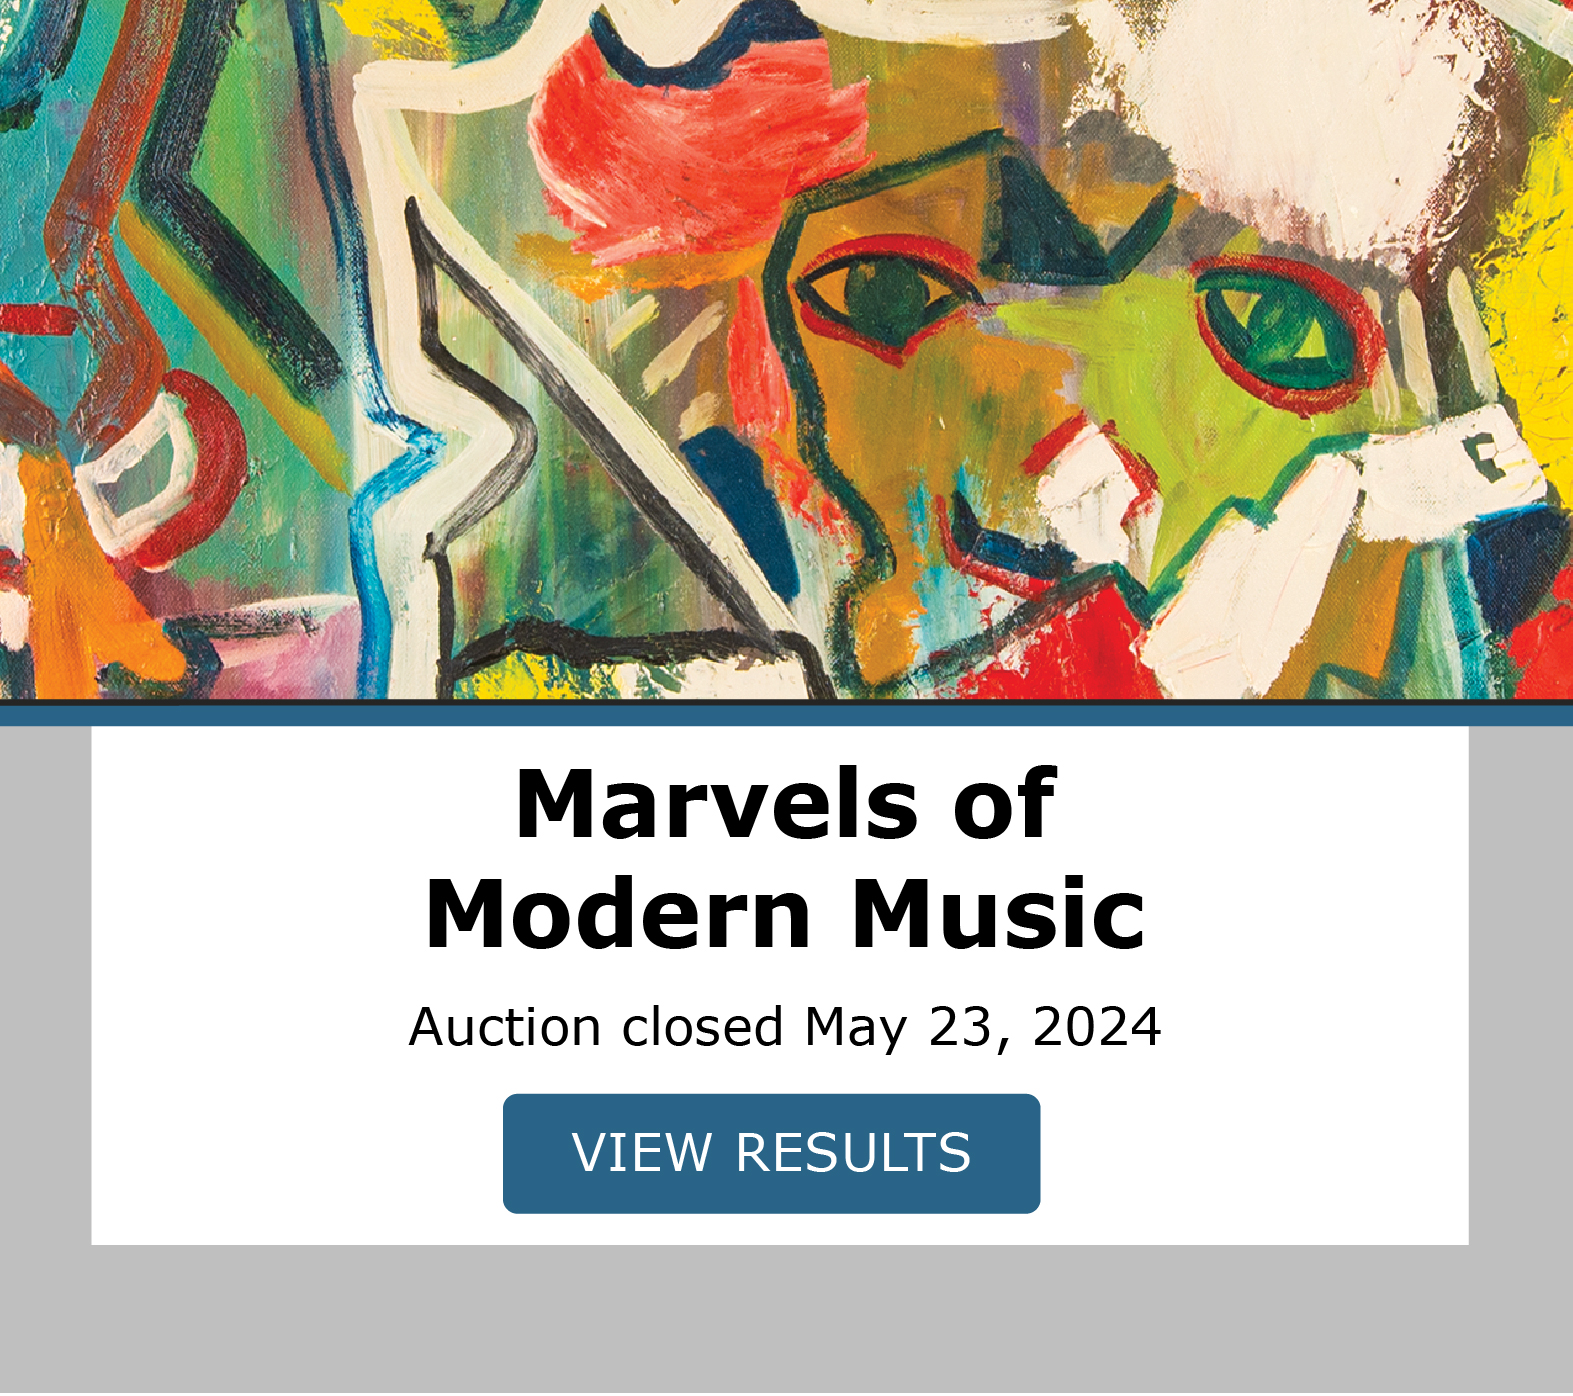 Marvels of Modern Music! Bidding closed May 23. View Results!